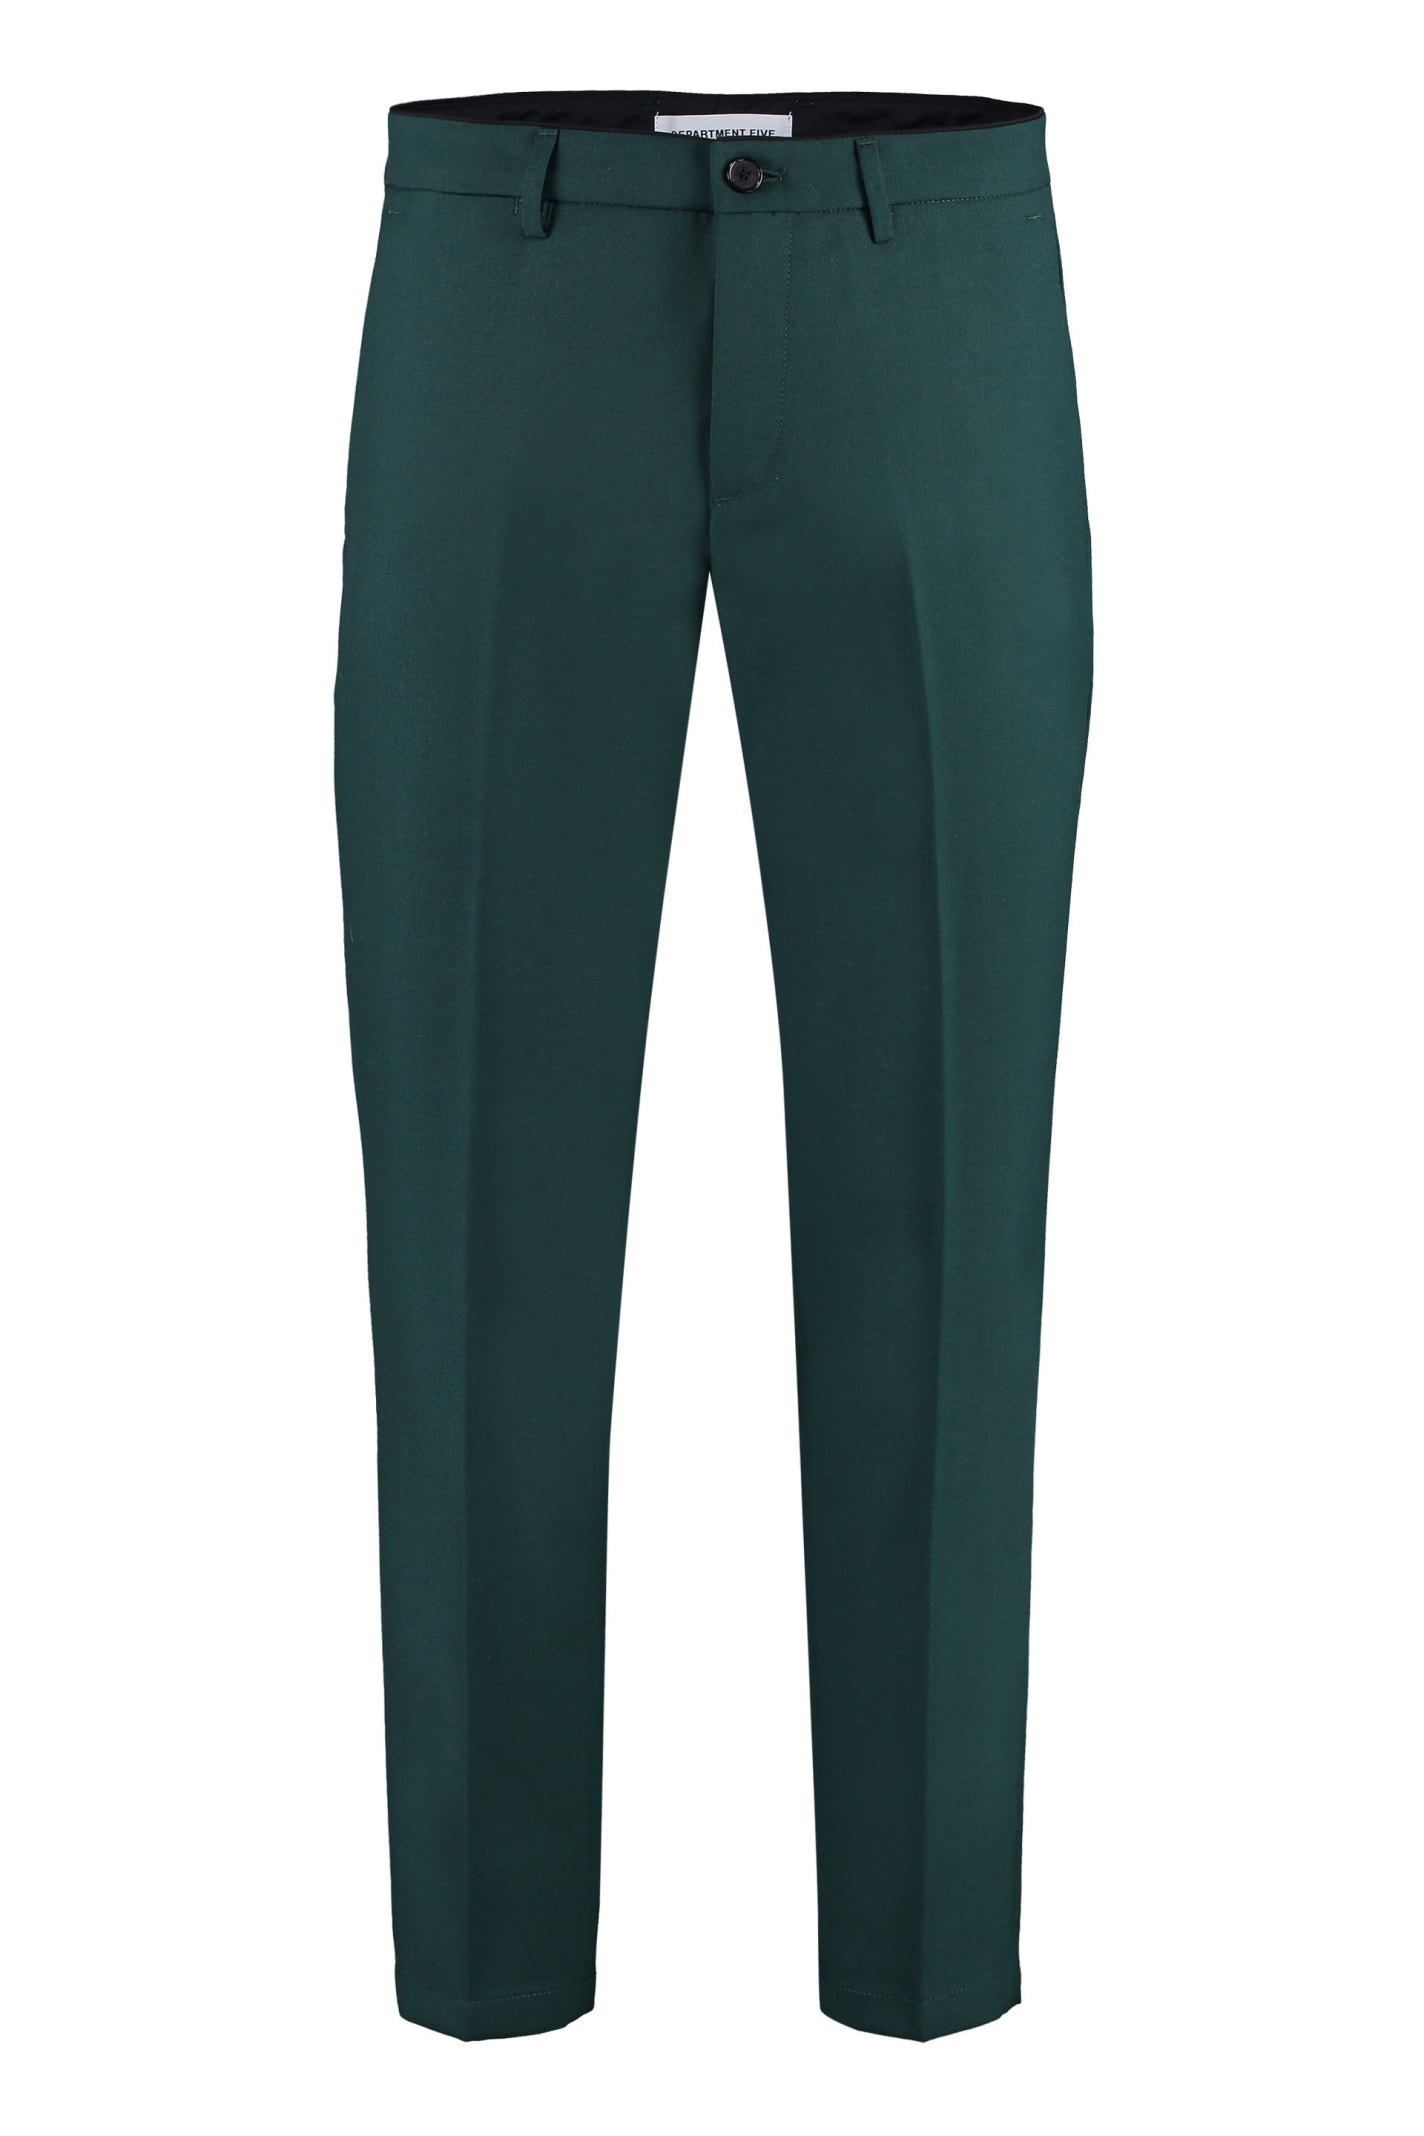 Department Five Setter Wool Blend Trousers